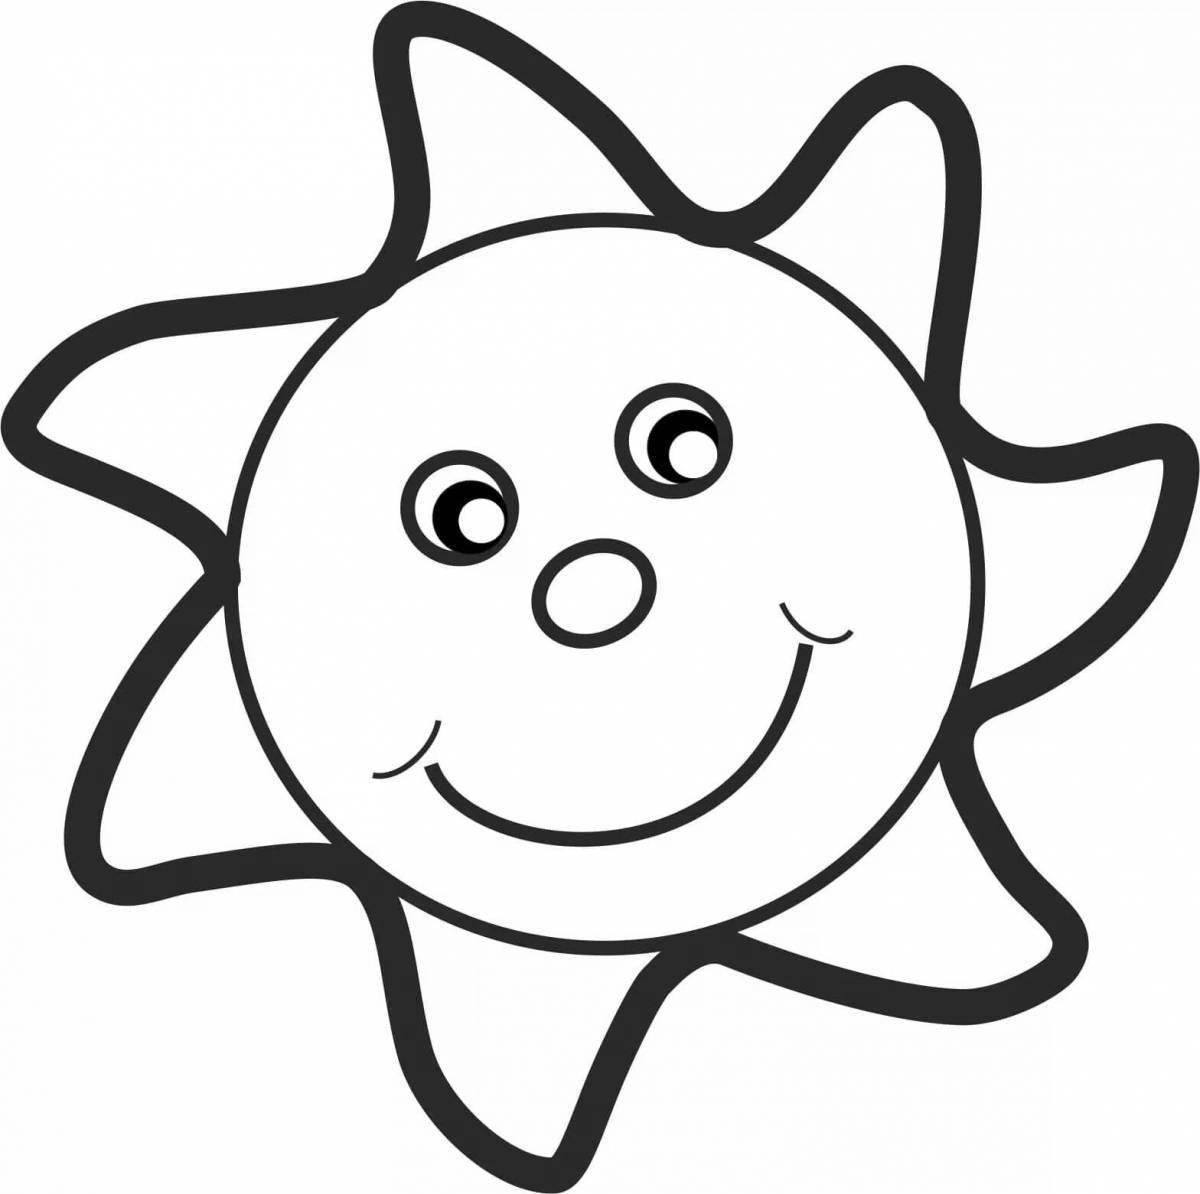 Glorious sun coloring book for 3-4 year olds